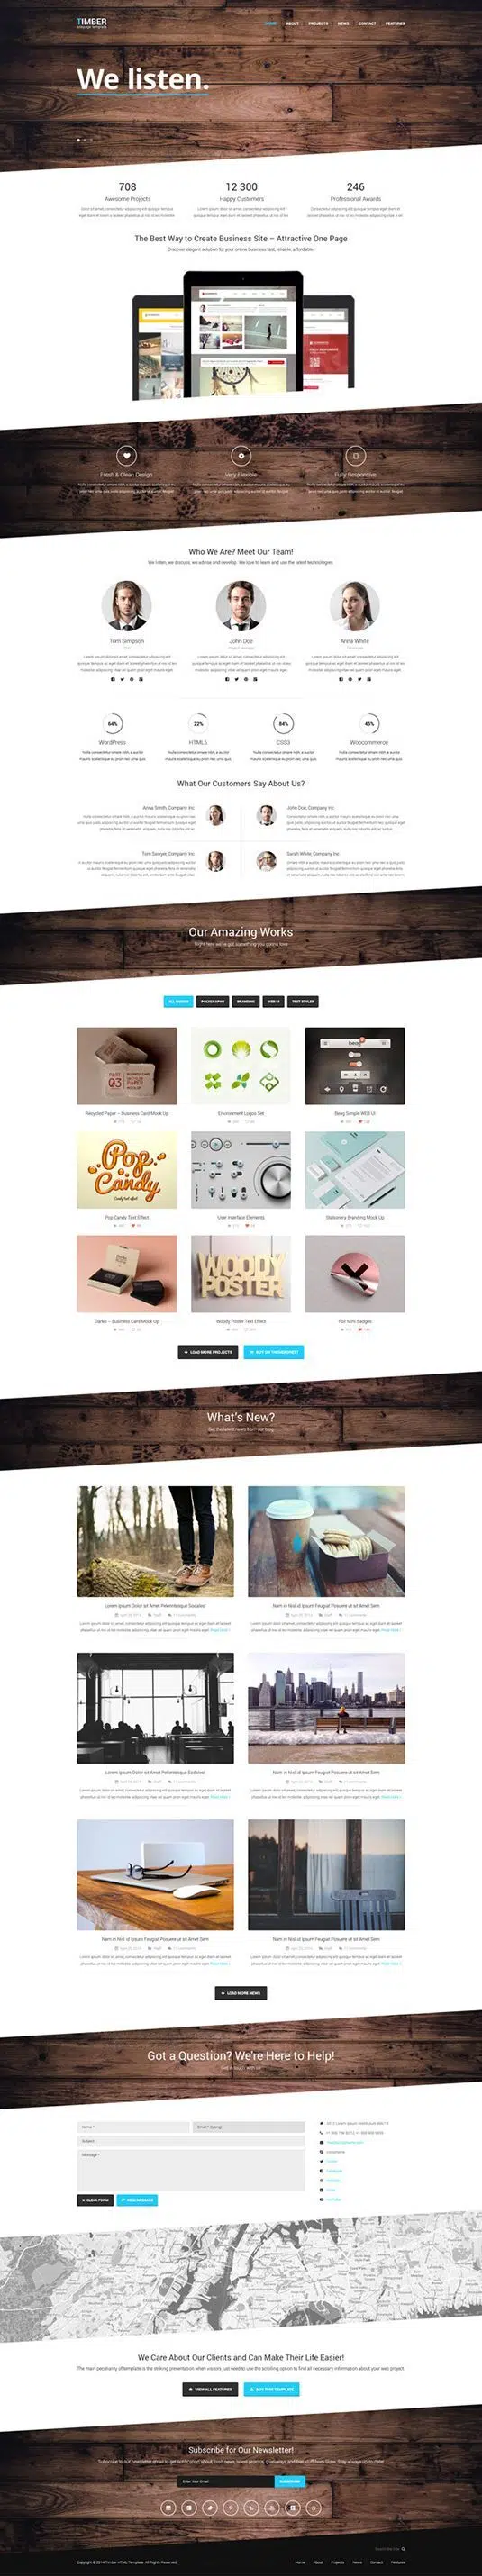 Like the idea of blocks of photographs for the review segment of landing page. H...